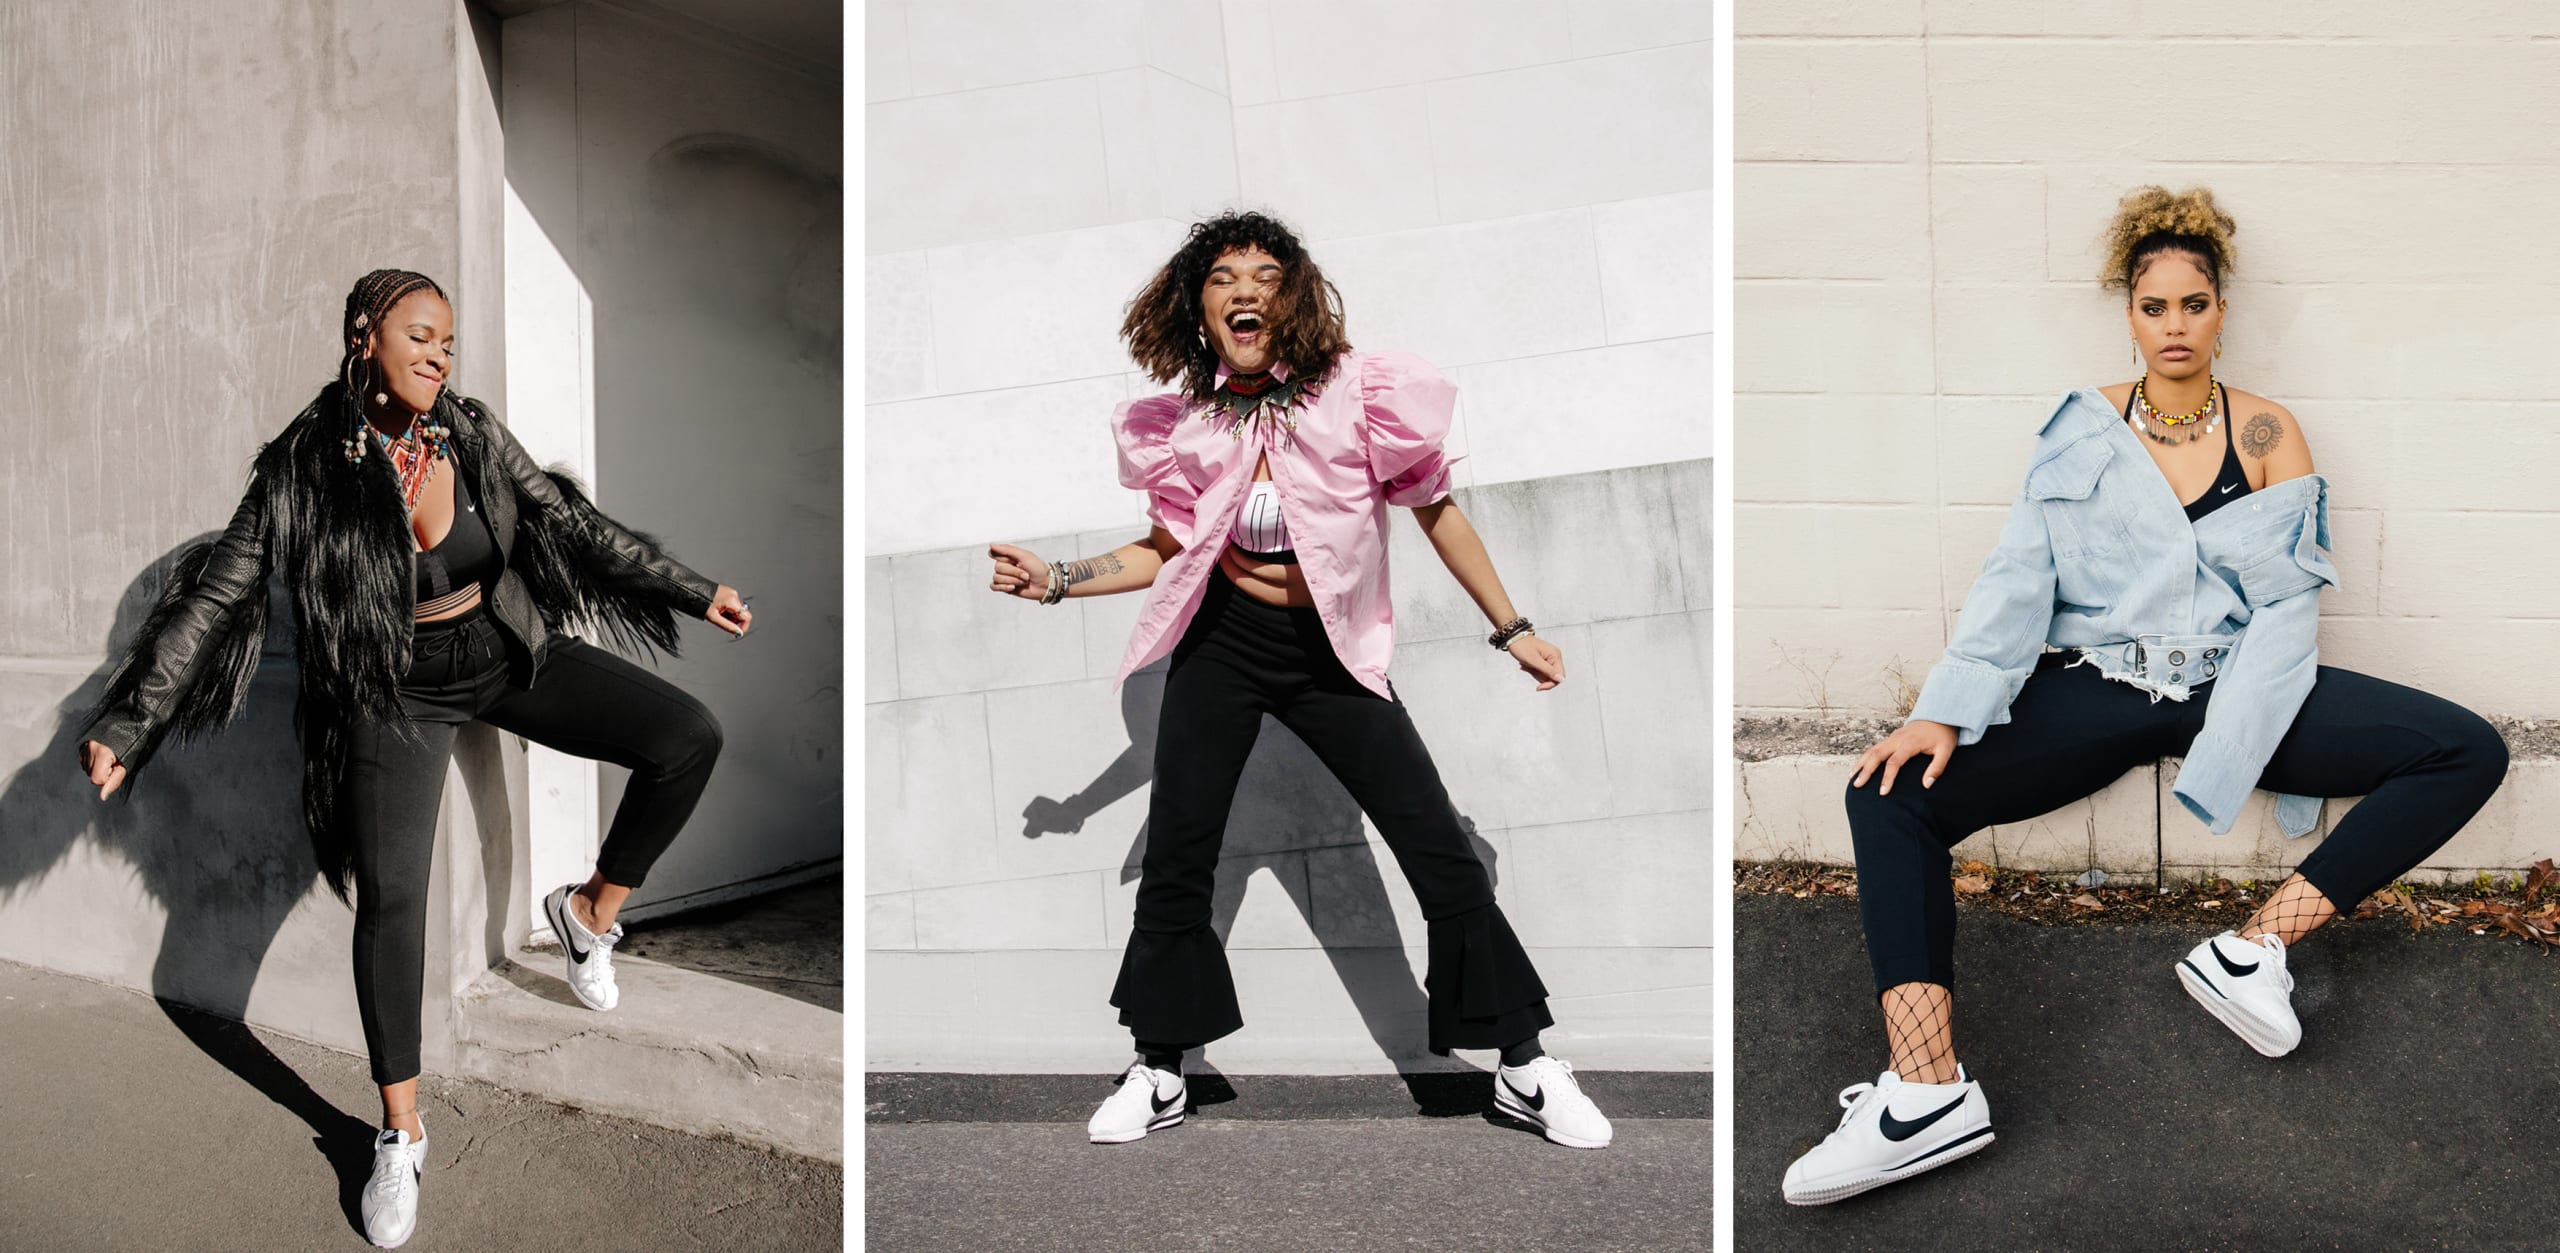 zonde oven Psychologisch Nike delves into zines to celebrate the Cortez, flaunts social media stars  in street style photography - stoppress.co.nz